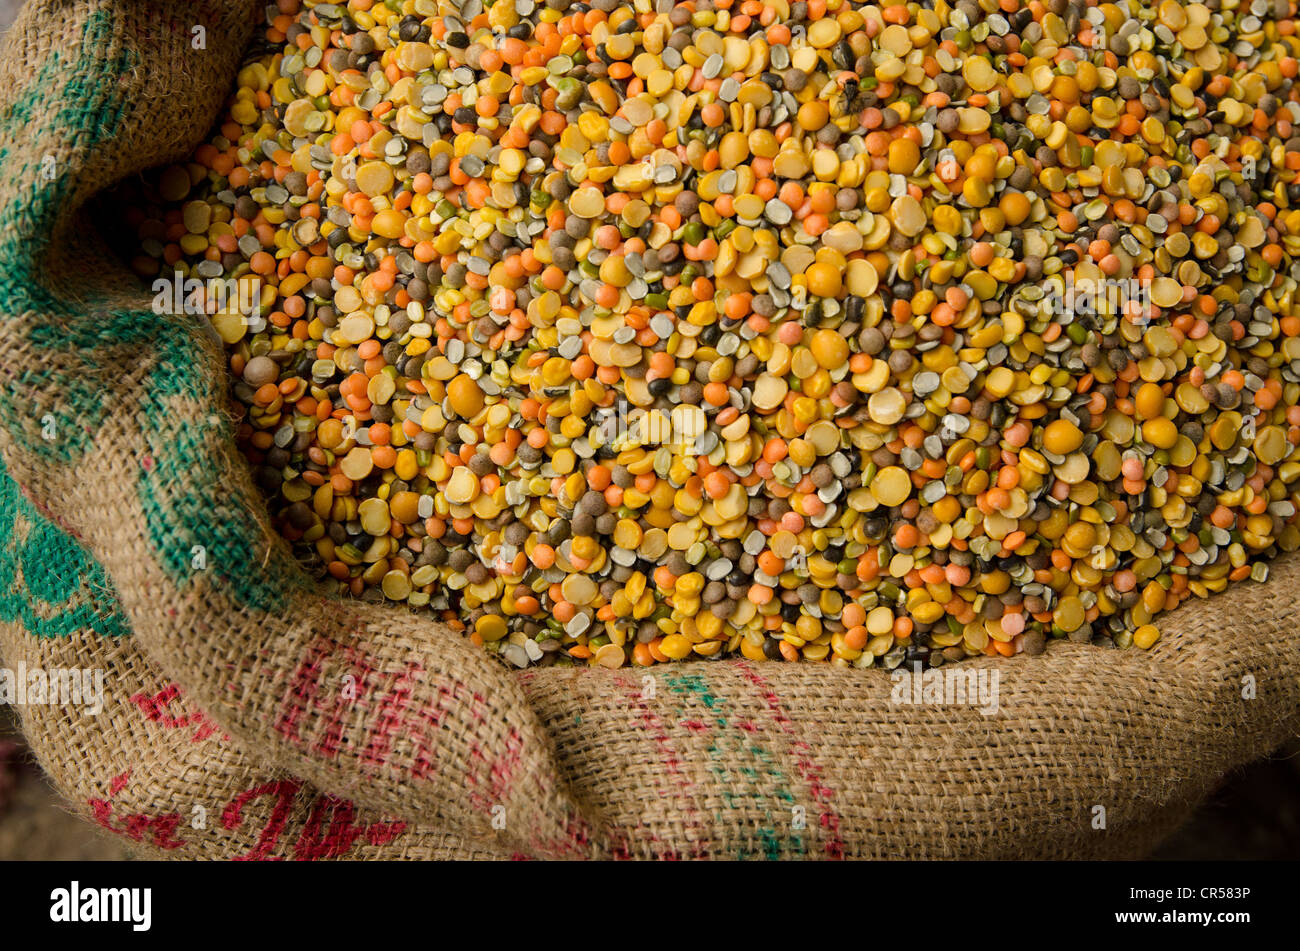 Mixed Dhal lentils for sale on the market in the suburb of Paharganj, New Delhi, India, Asia Stock Photo